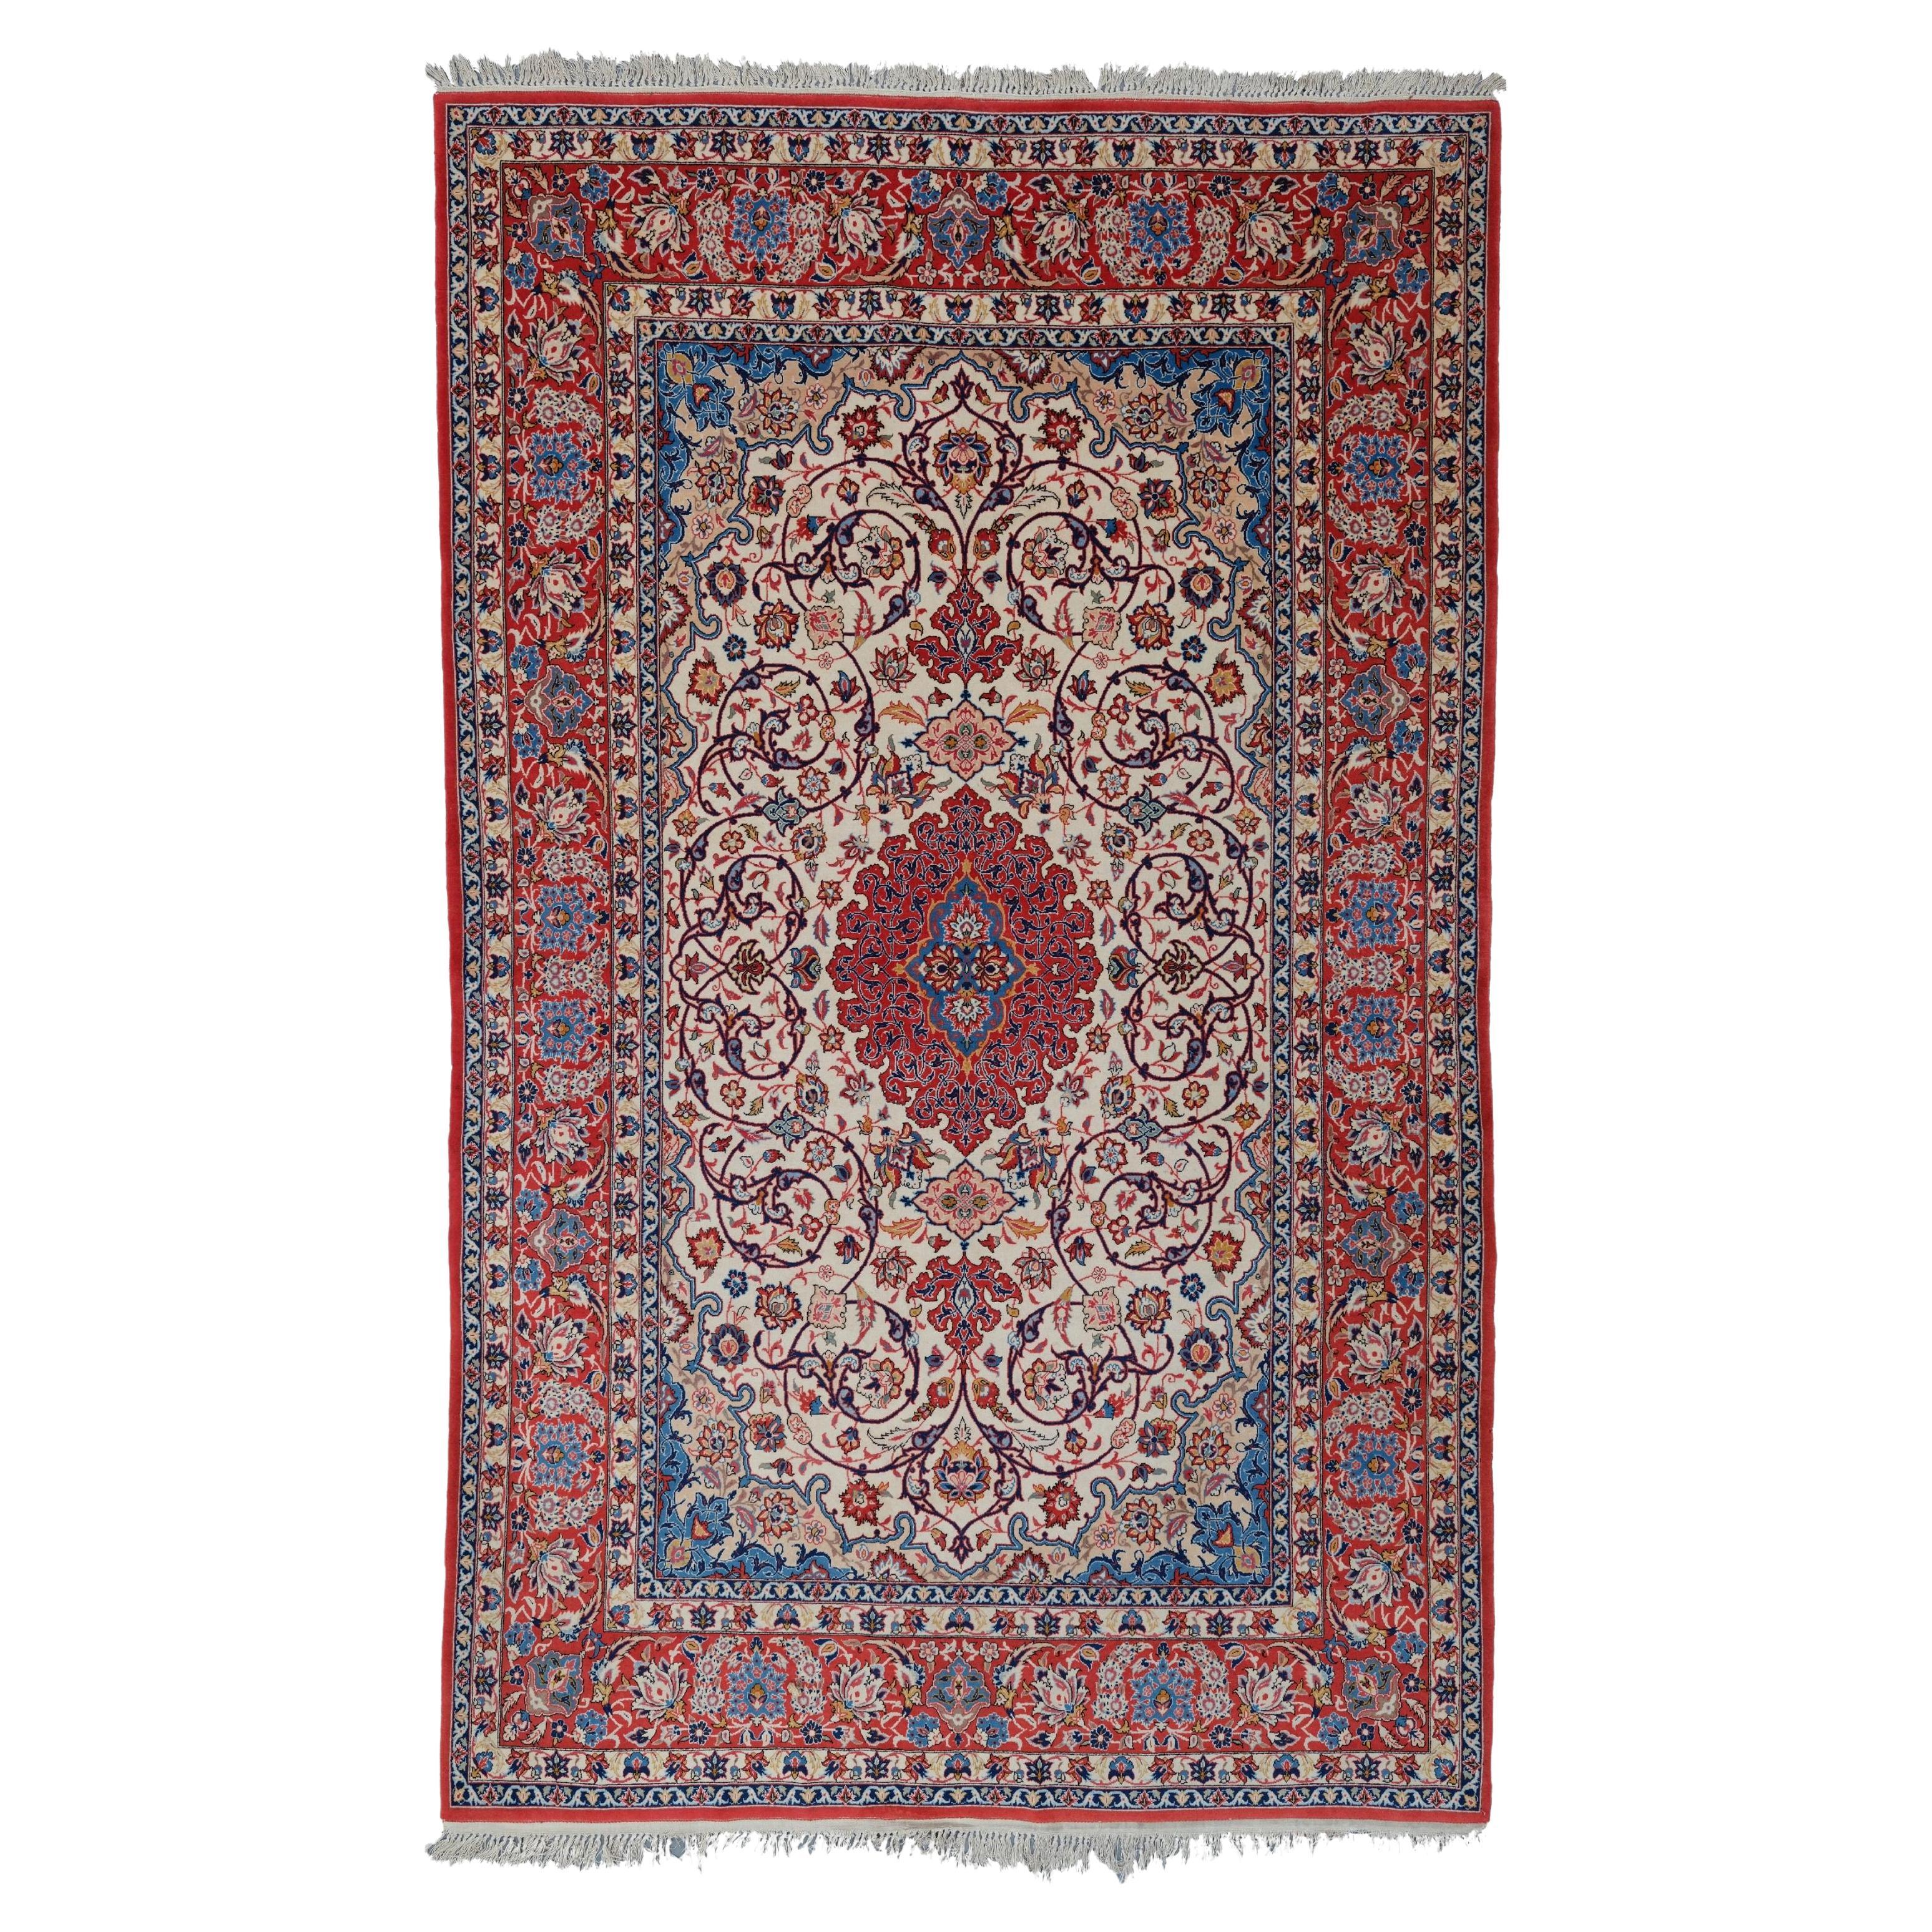 Antique Isfahan Rug - Late of 19th Century Isfahan Rug, Antique Rug, Vintage Rug For Sale